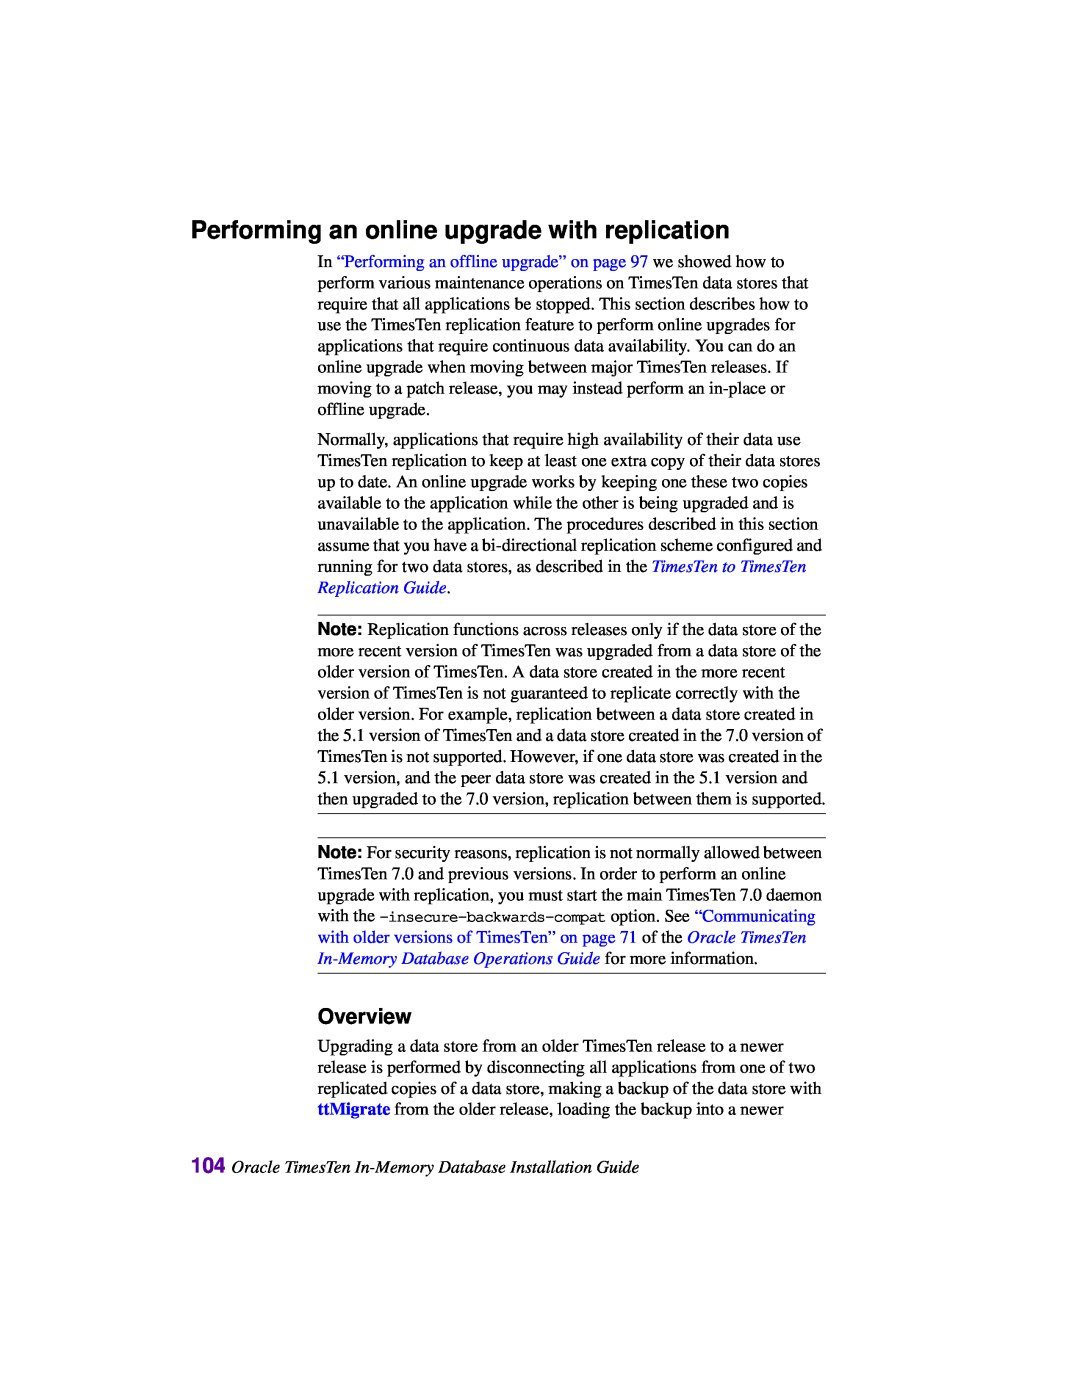 Oracle Audio Technologies B31679-01 manual Performing an online upgrade with replication, Overview 